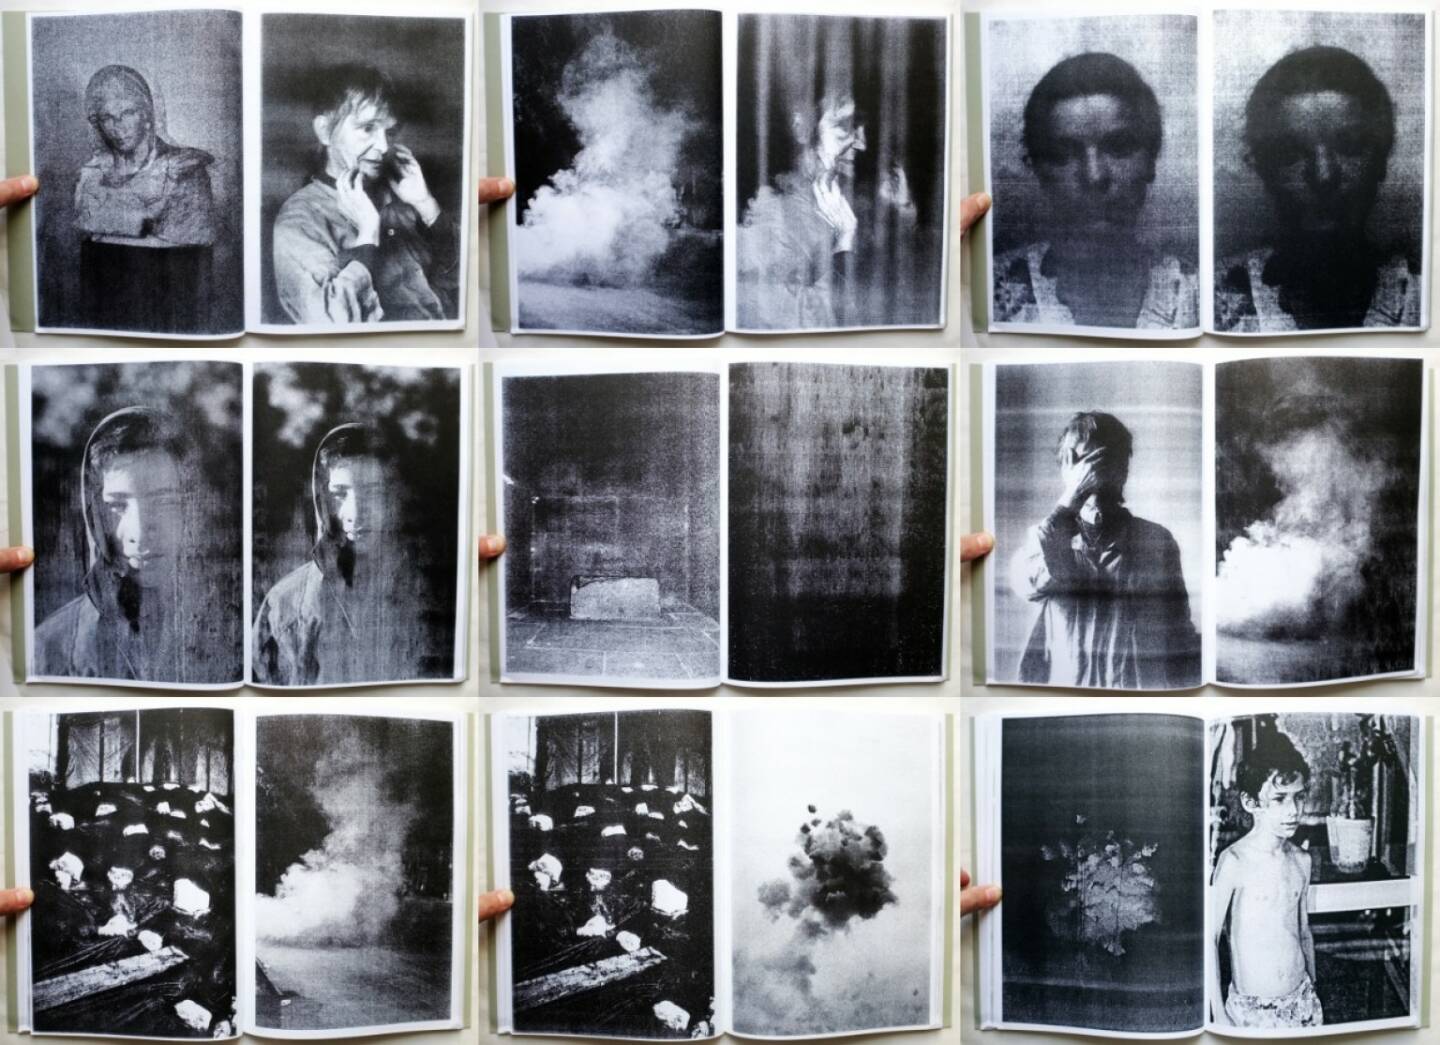 Thomas Hauser - The Wake of Dust, Self published 2015, Beispielseiten, sample spreads - http://josefchladek.com/book/thomas_hauser_-_the_wake_of_dust